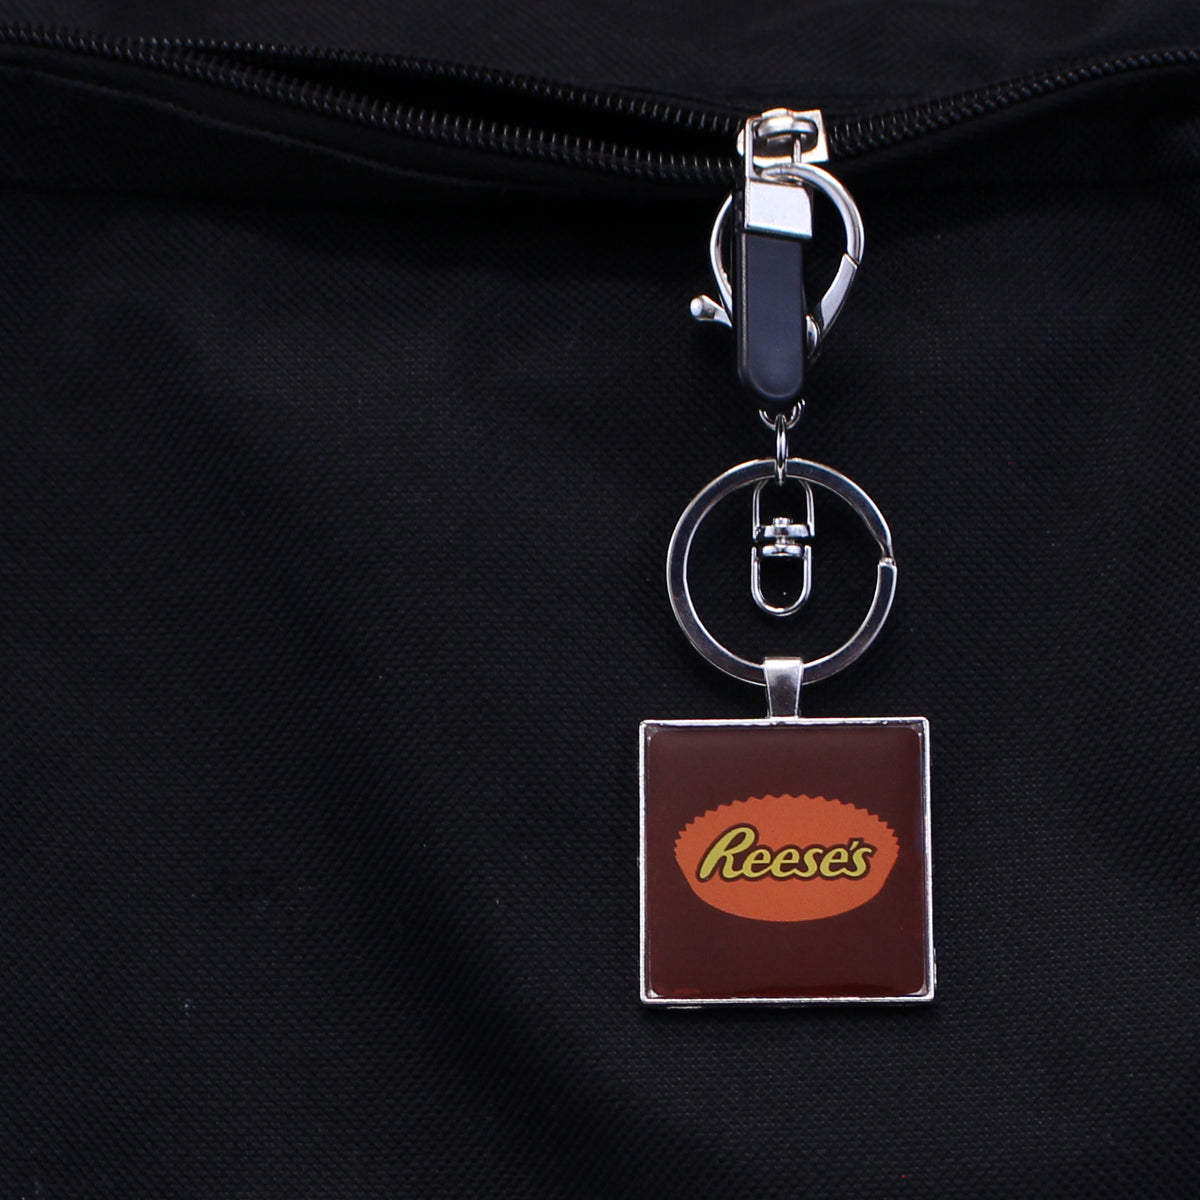 REESE'S Brown Square / Key Chain - Route One Apparel